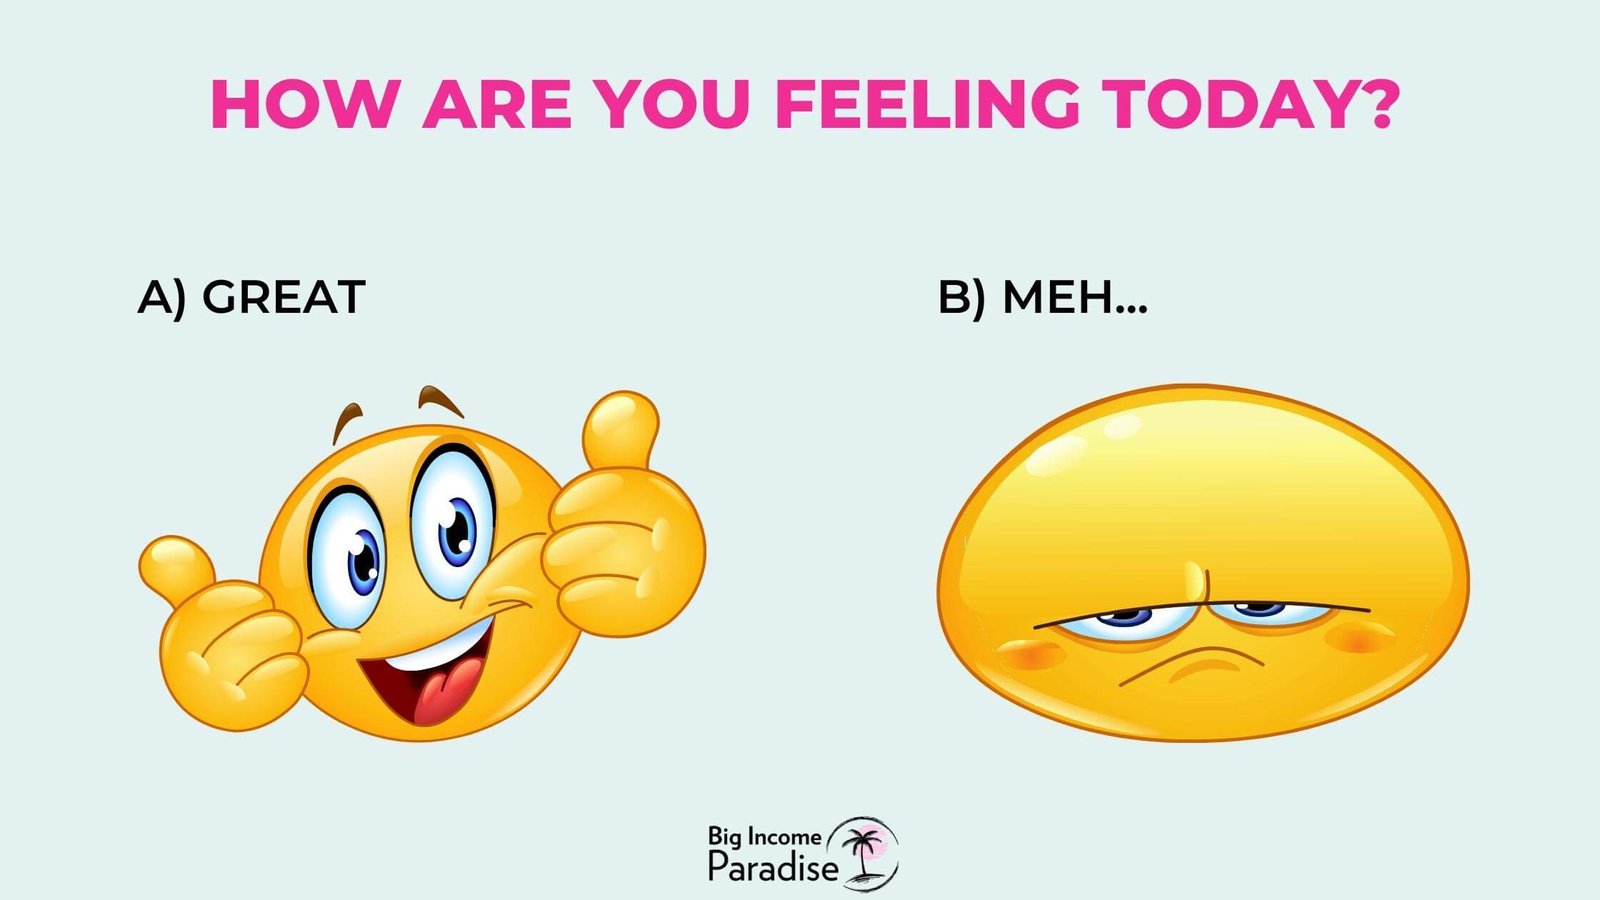 How are you feeling today - Instagram poll question example